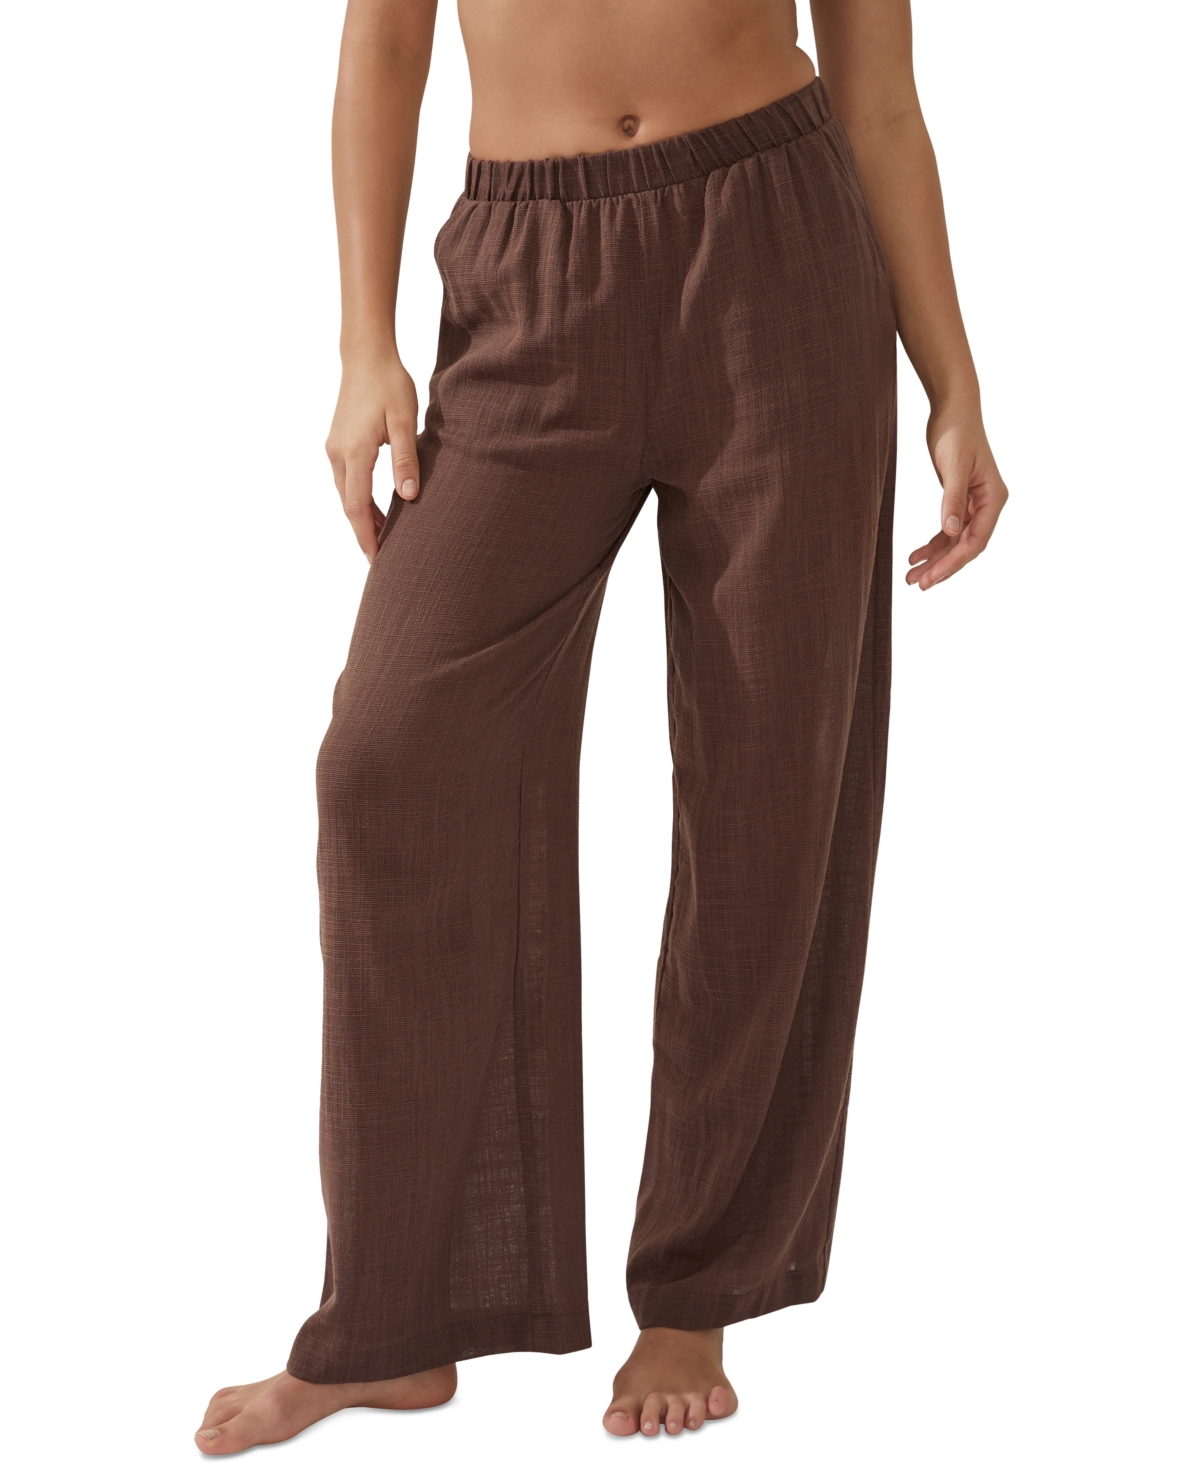 Women's Relaxed Beach Pants Cover-Up - Brownie